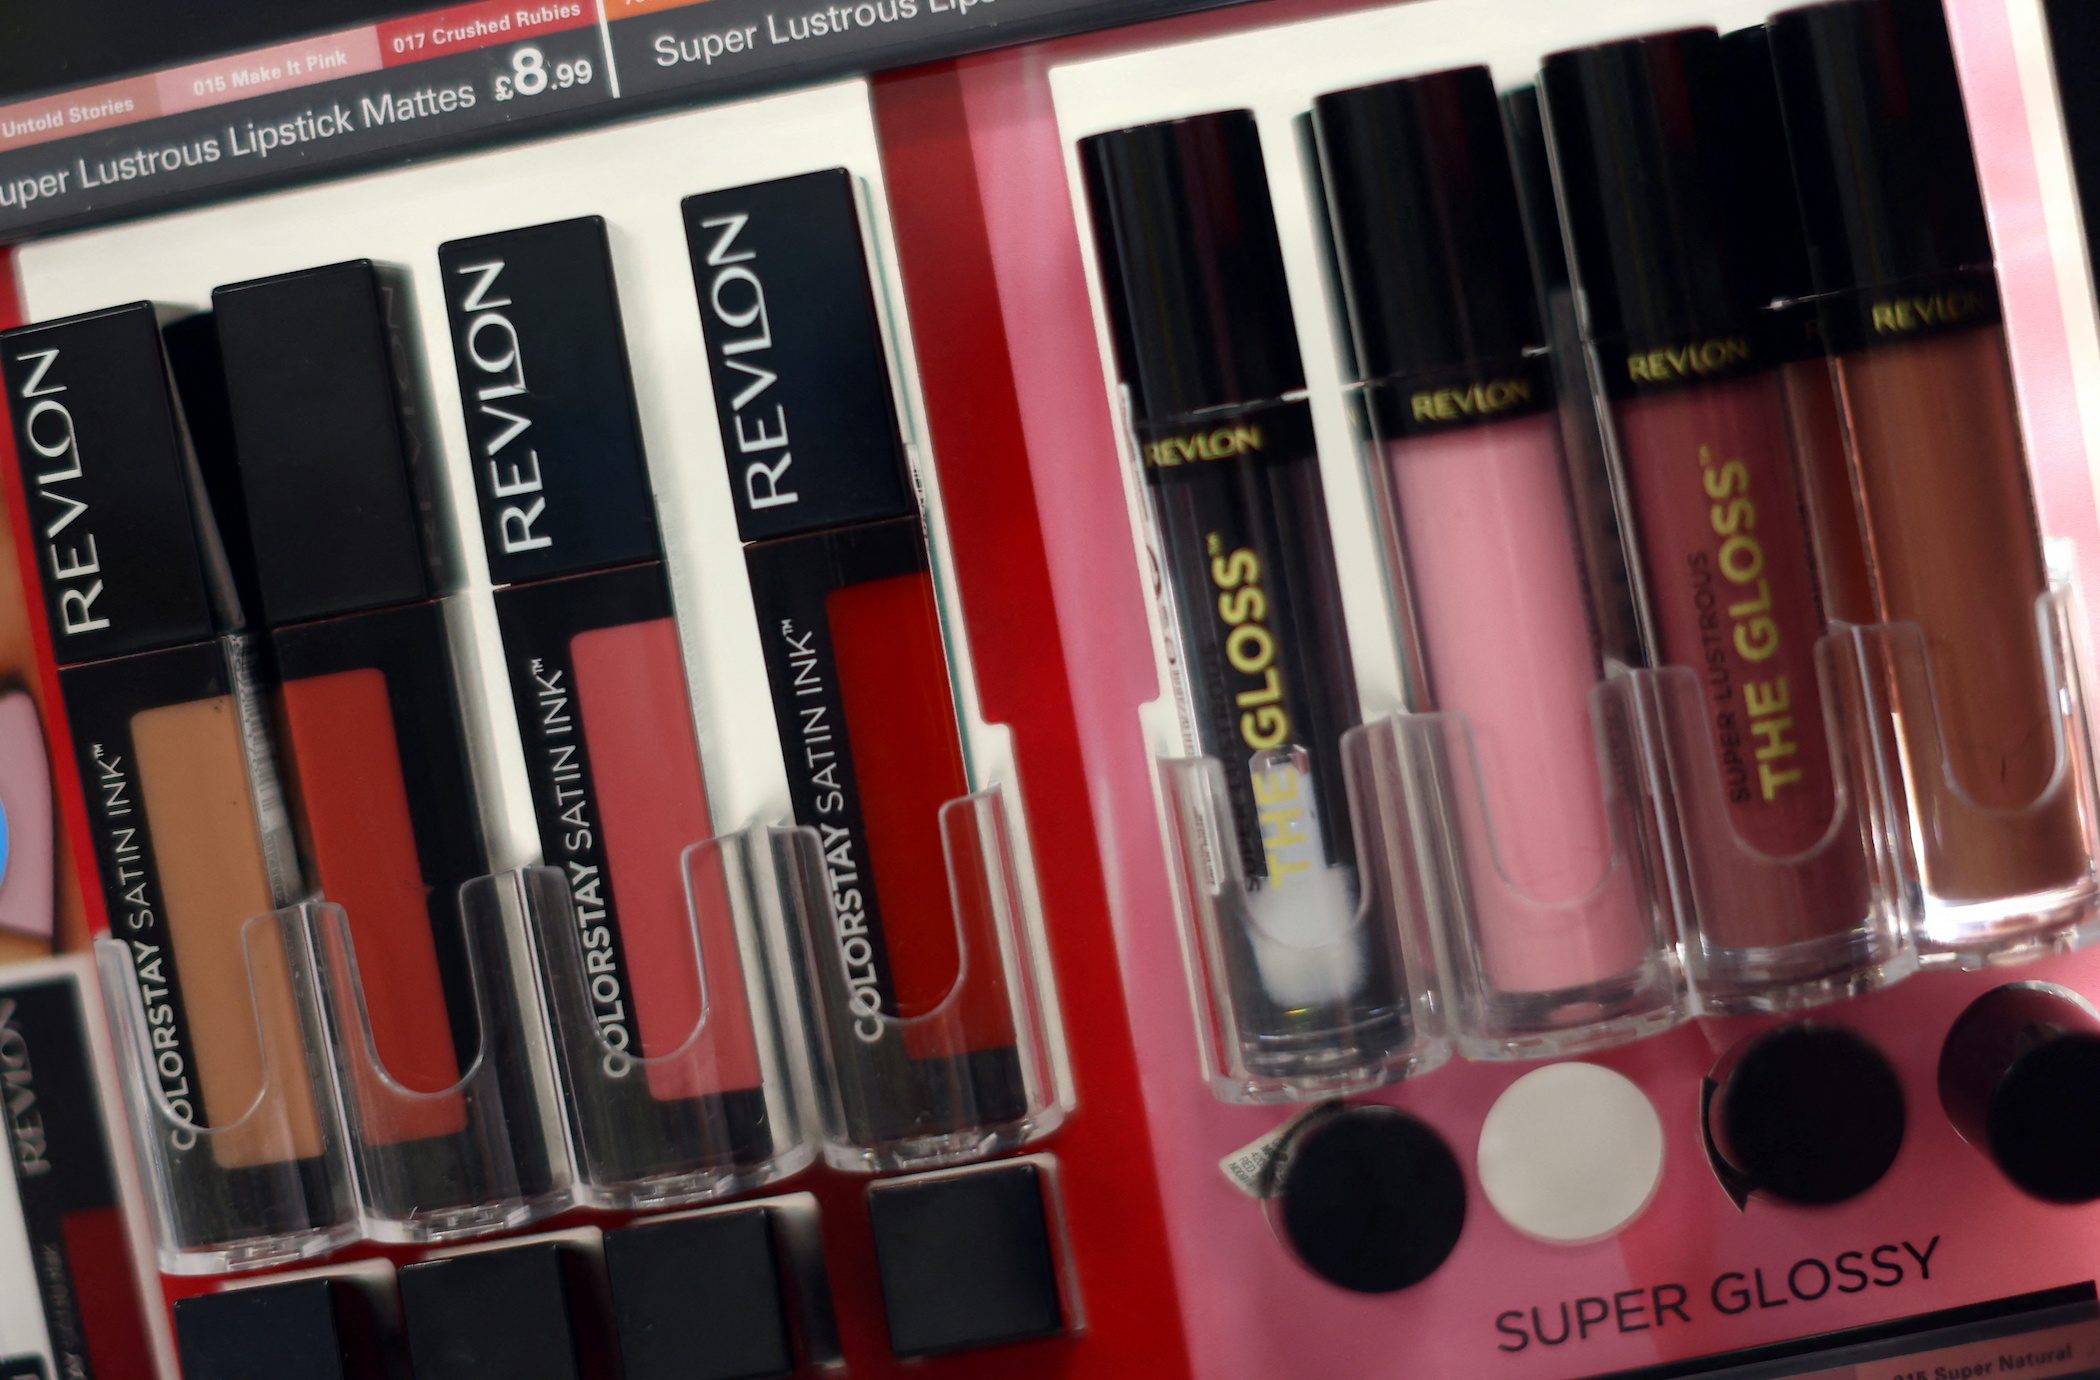 Revlon files for bankruptcy, blames supply chain snags